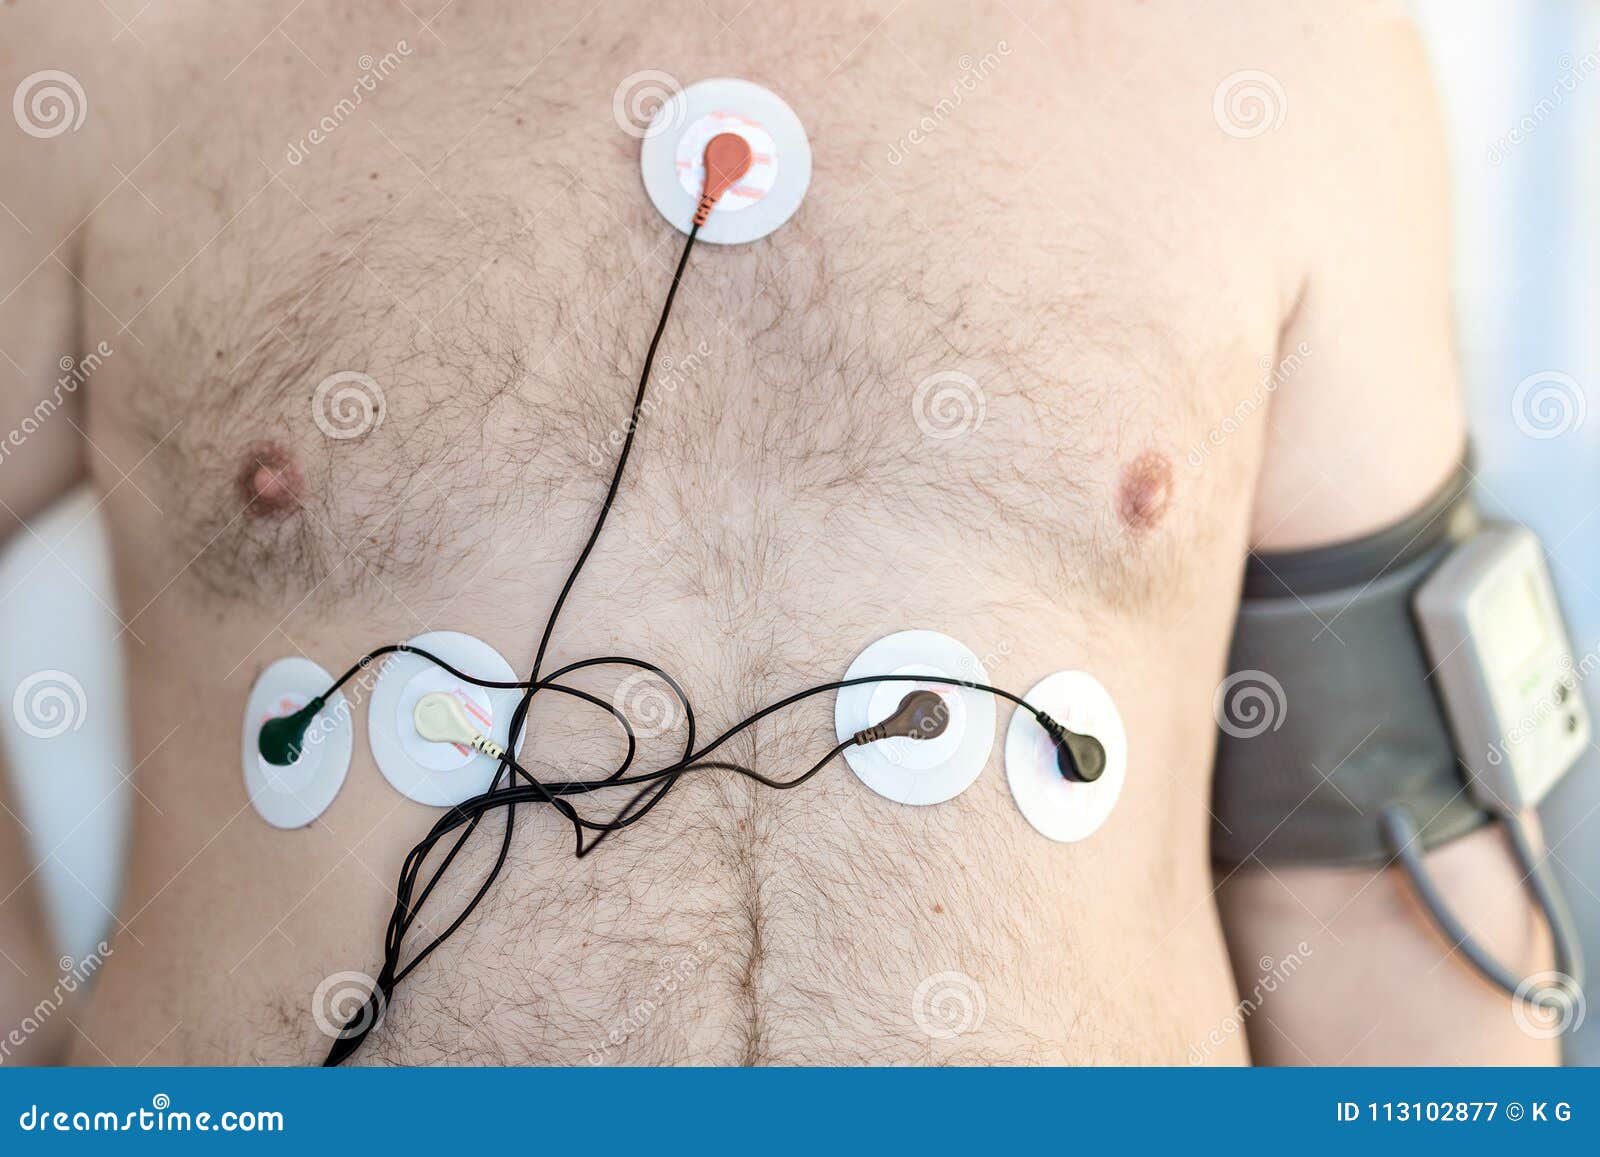 https://thumbs.dreamstime.com/z/holter-monitor-device-blood-pressure-recorder-human-male-body-cardiogram-monitoring-overweight-person-high-risk-113102877.jpg